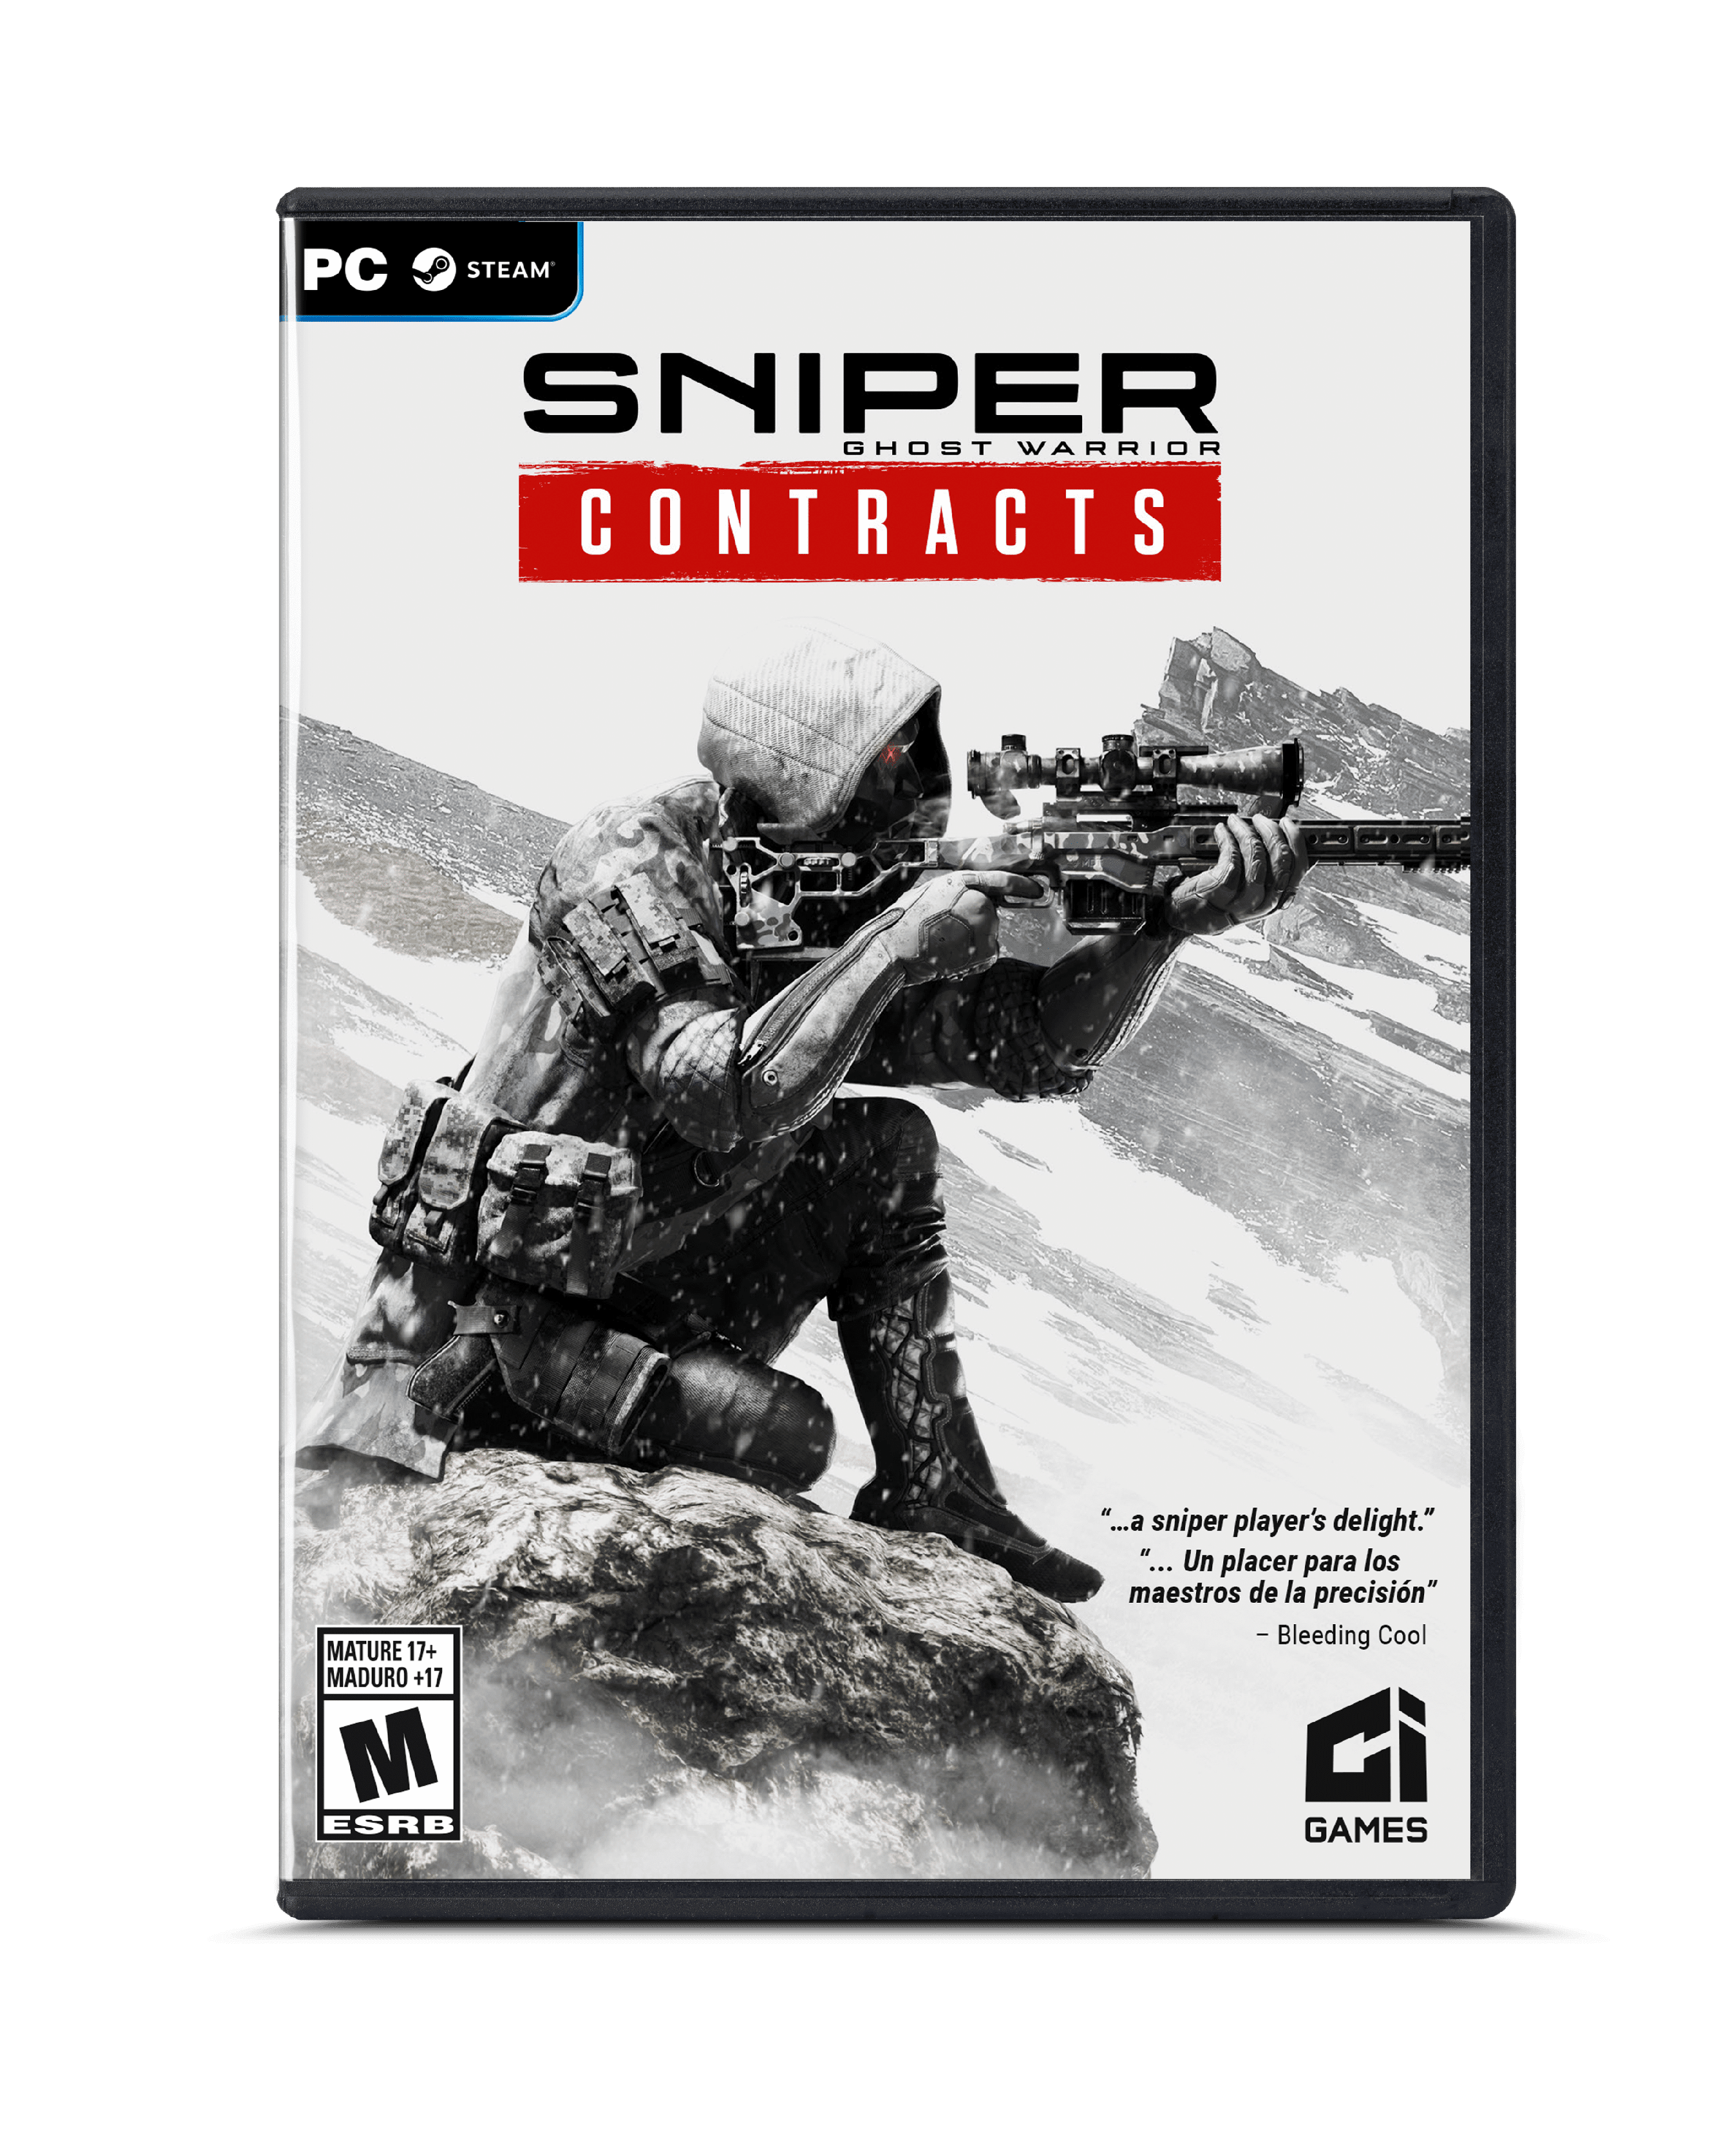 get more silver in contract killer sniper video no battleing